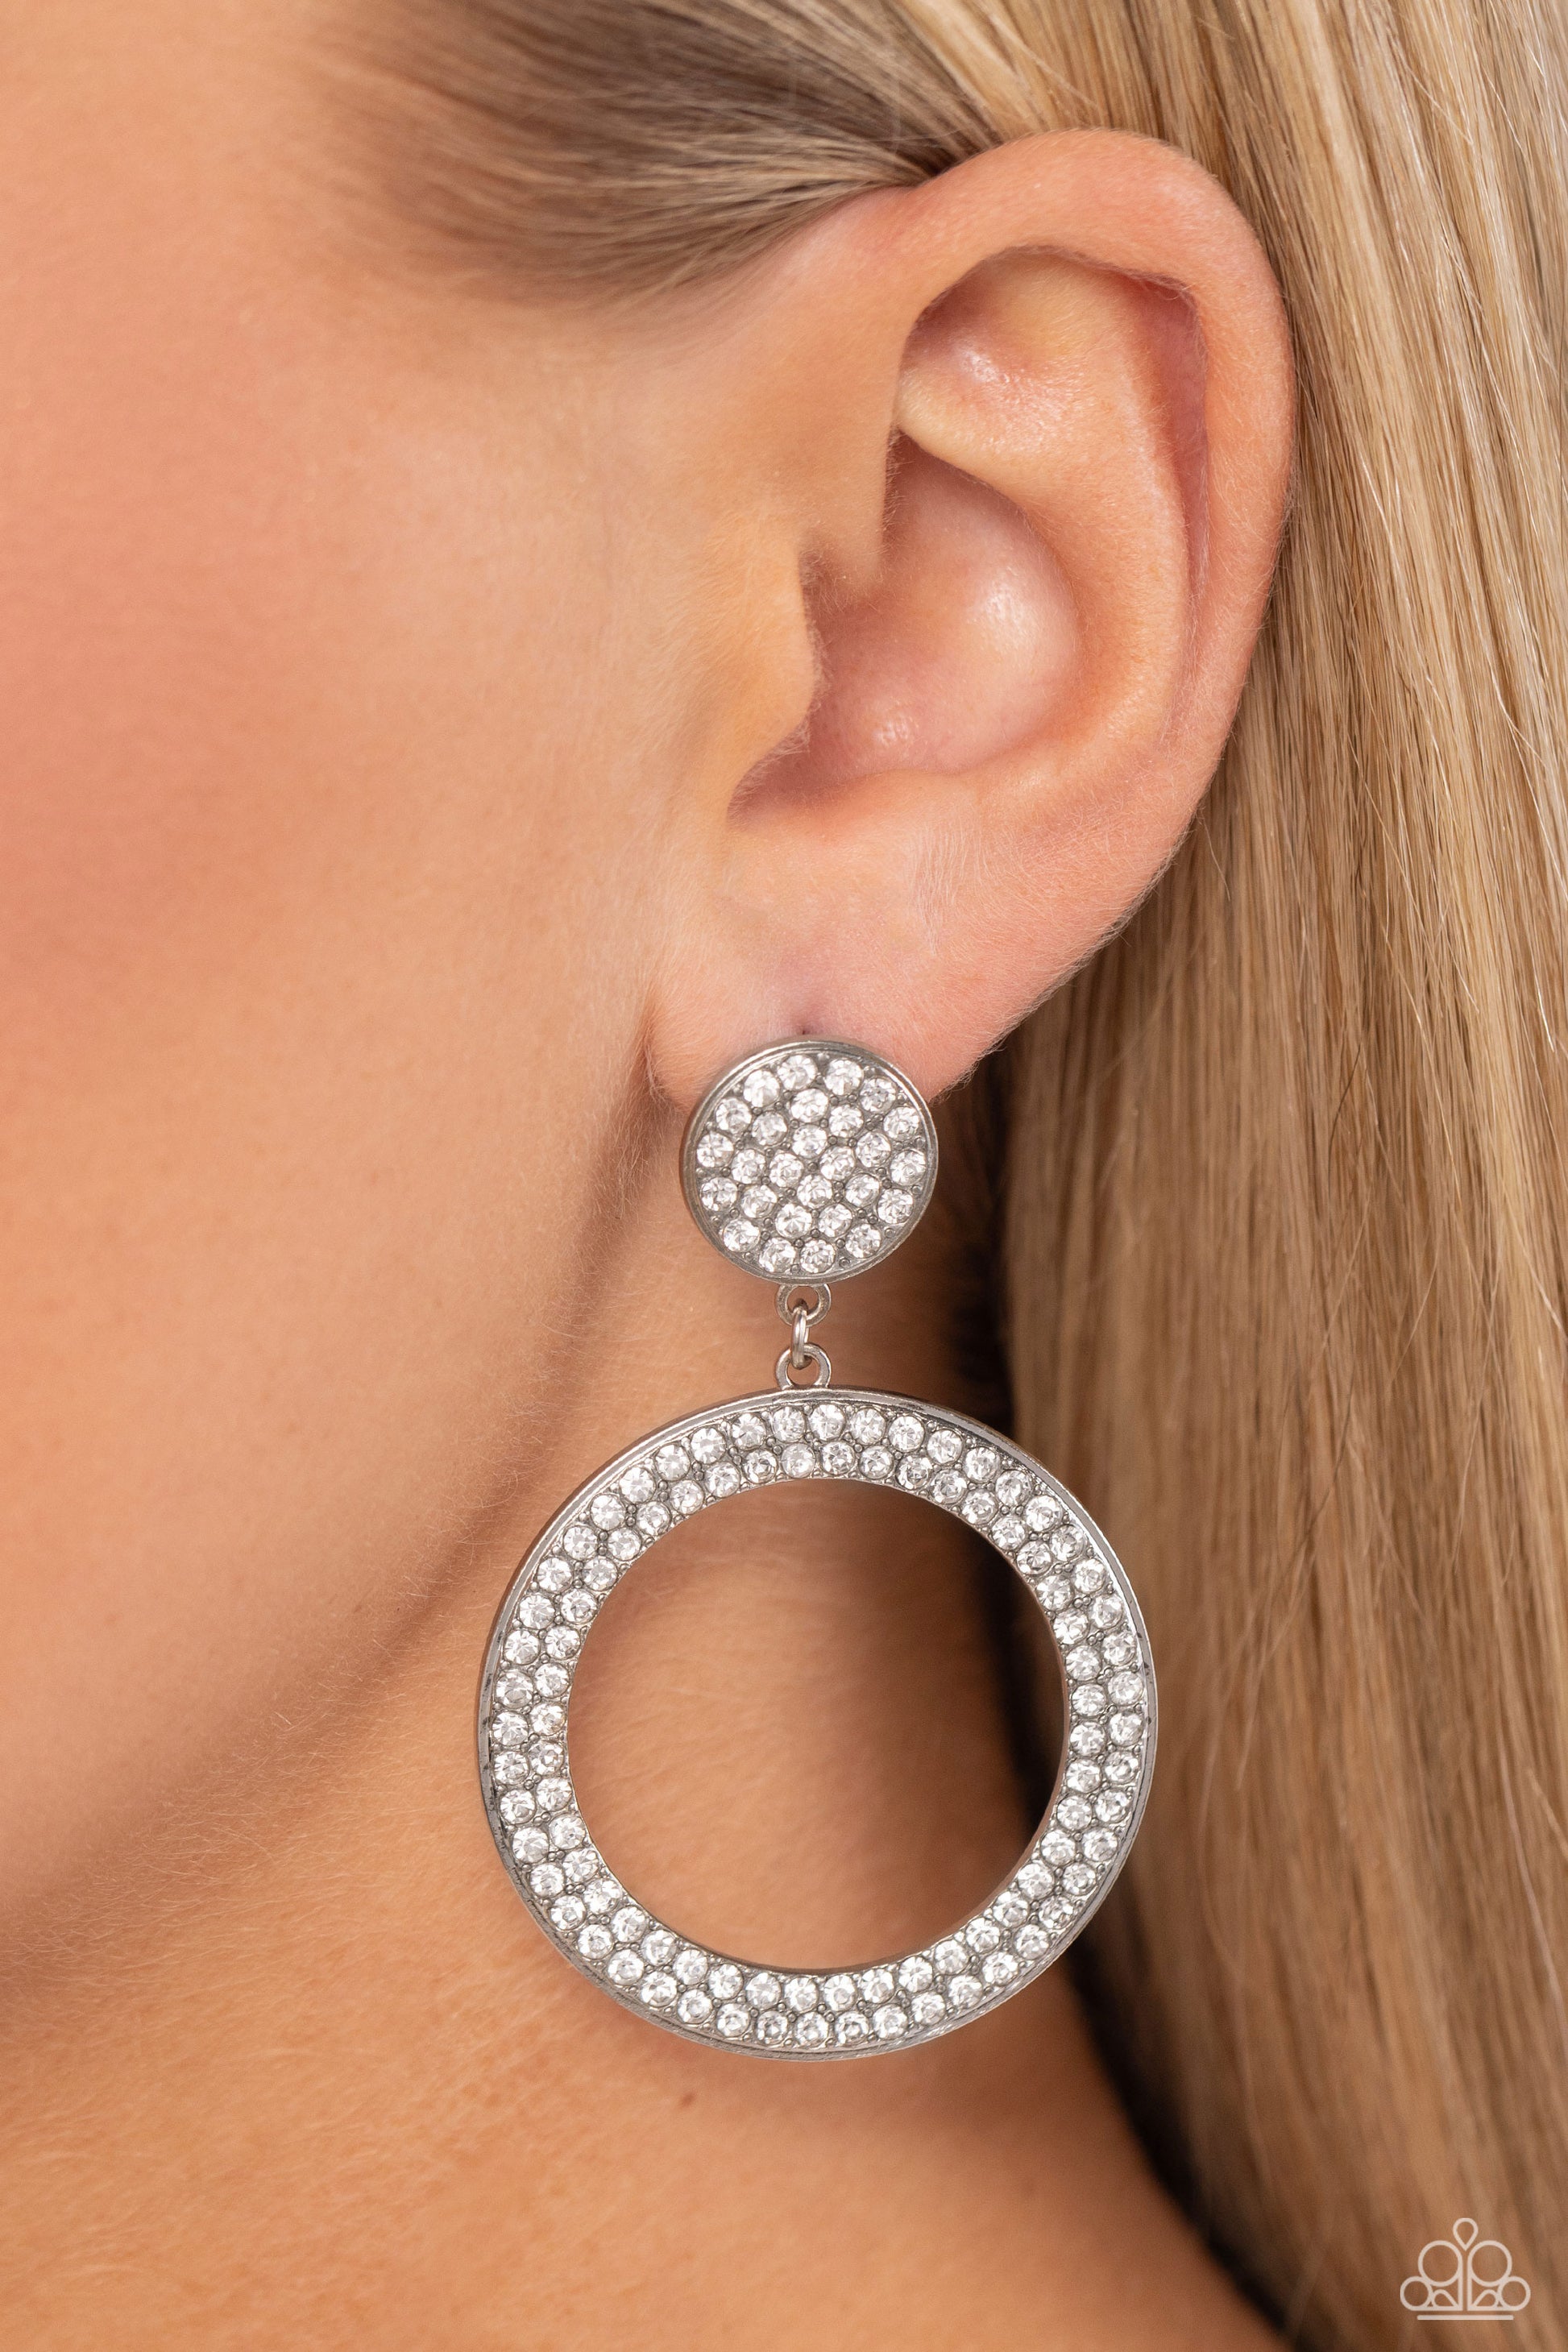 Paparazzi Accessories - GLOW You Away - White Earrings encrusted in rows of glassy white rhinestones, a flat silver hoop swings from the bottom of a white rhinestone dotted silver frame for a statement-making finish. Earring attaches to a standard post fitting.  Sold as one pair of post earrings.